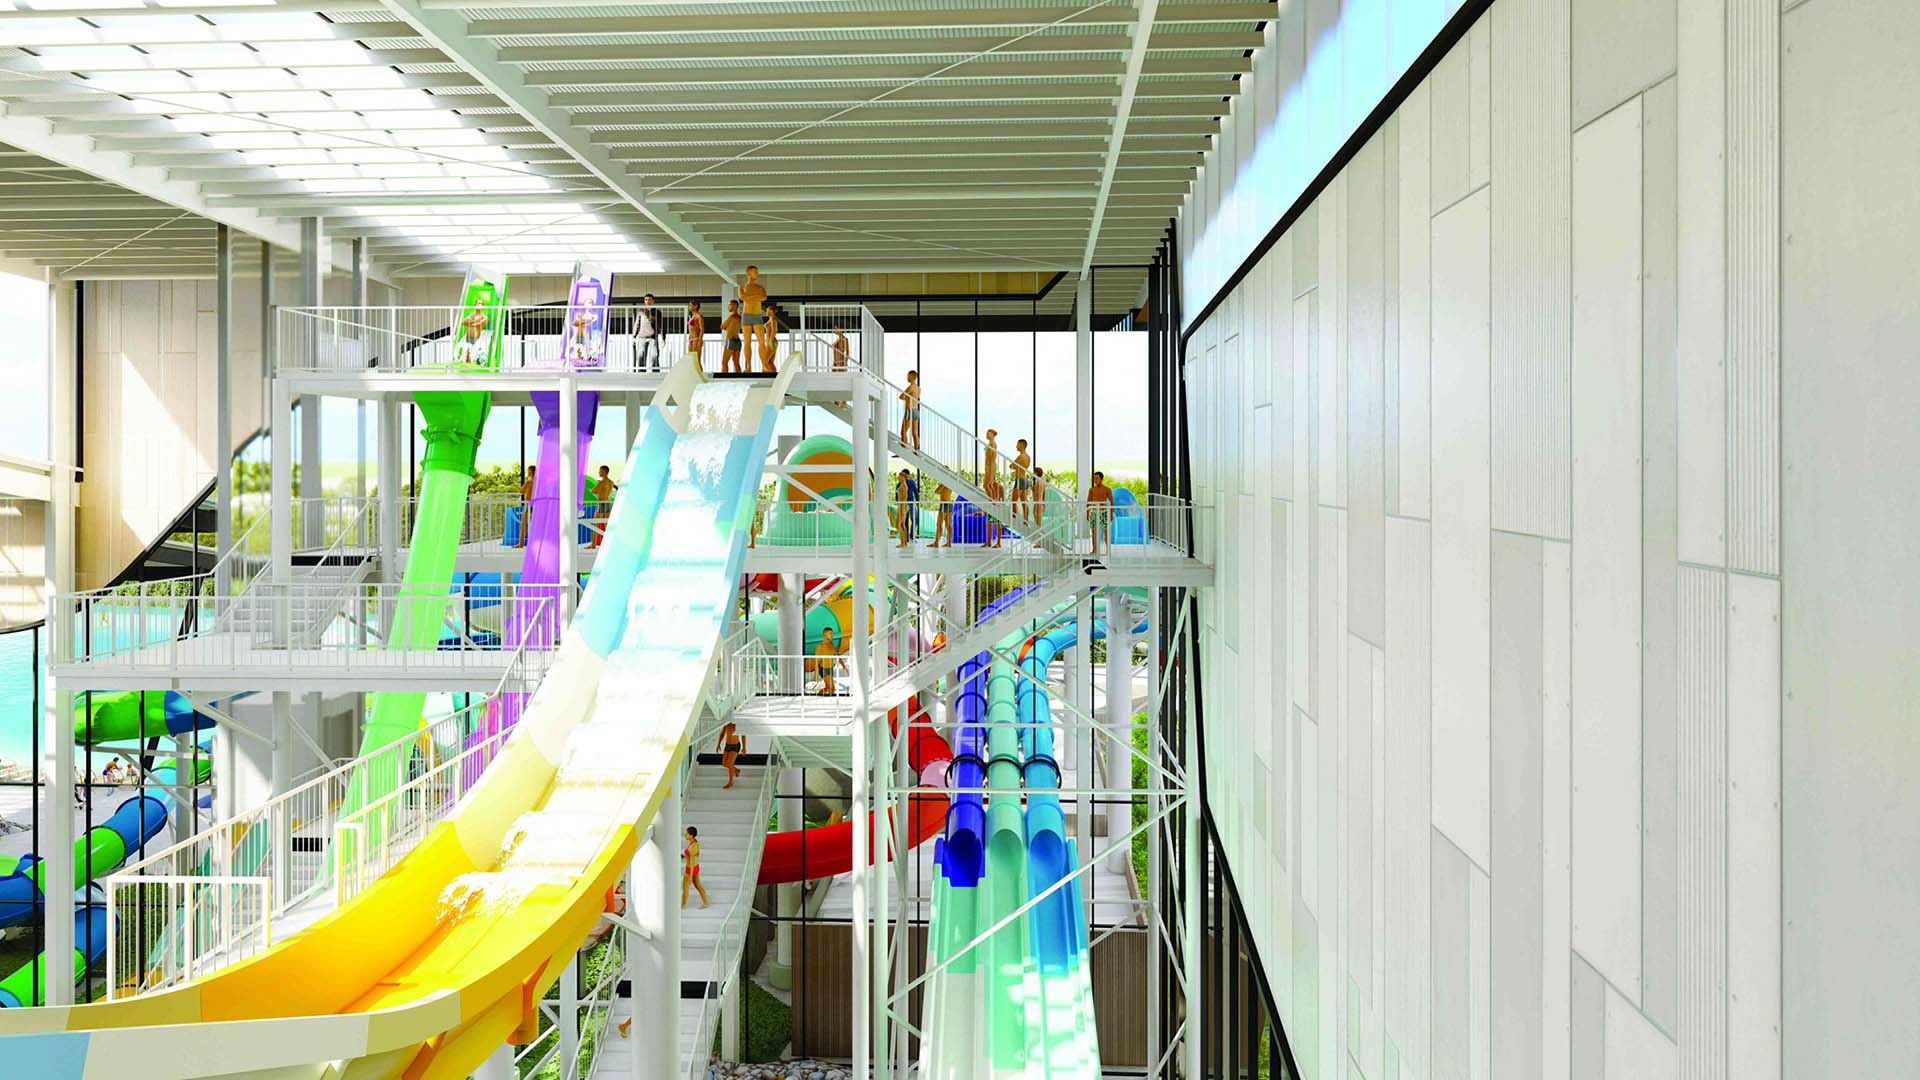 Australia Might Soon Be Home to the Southern Hemisphere's Biggest Indoor-Outdoor Water Park